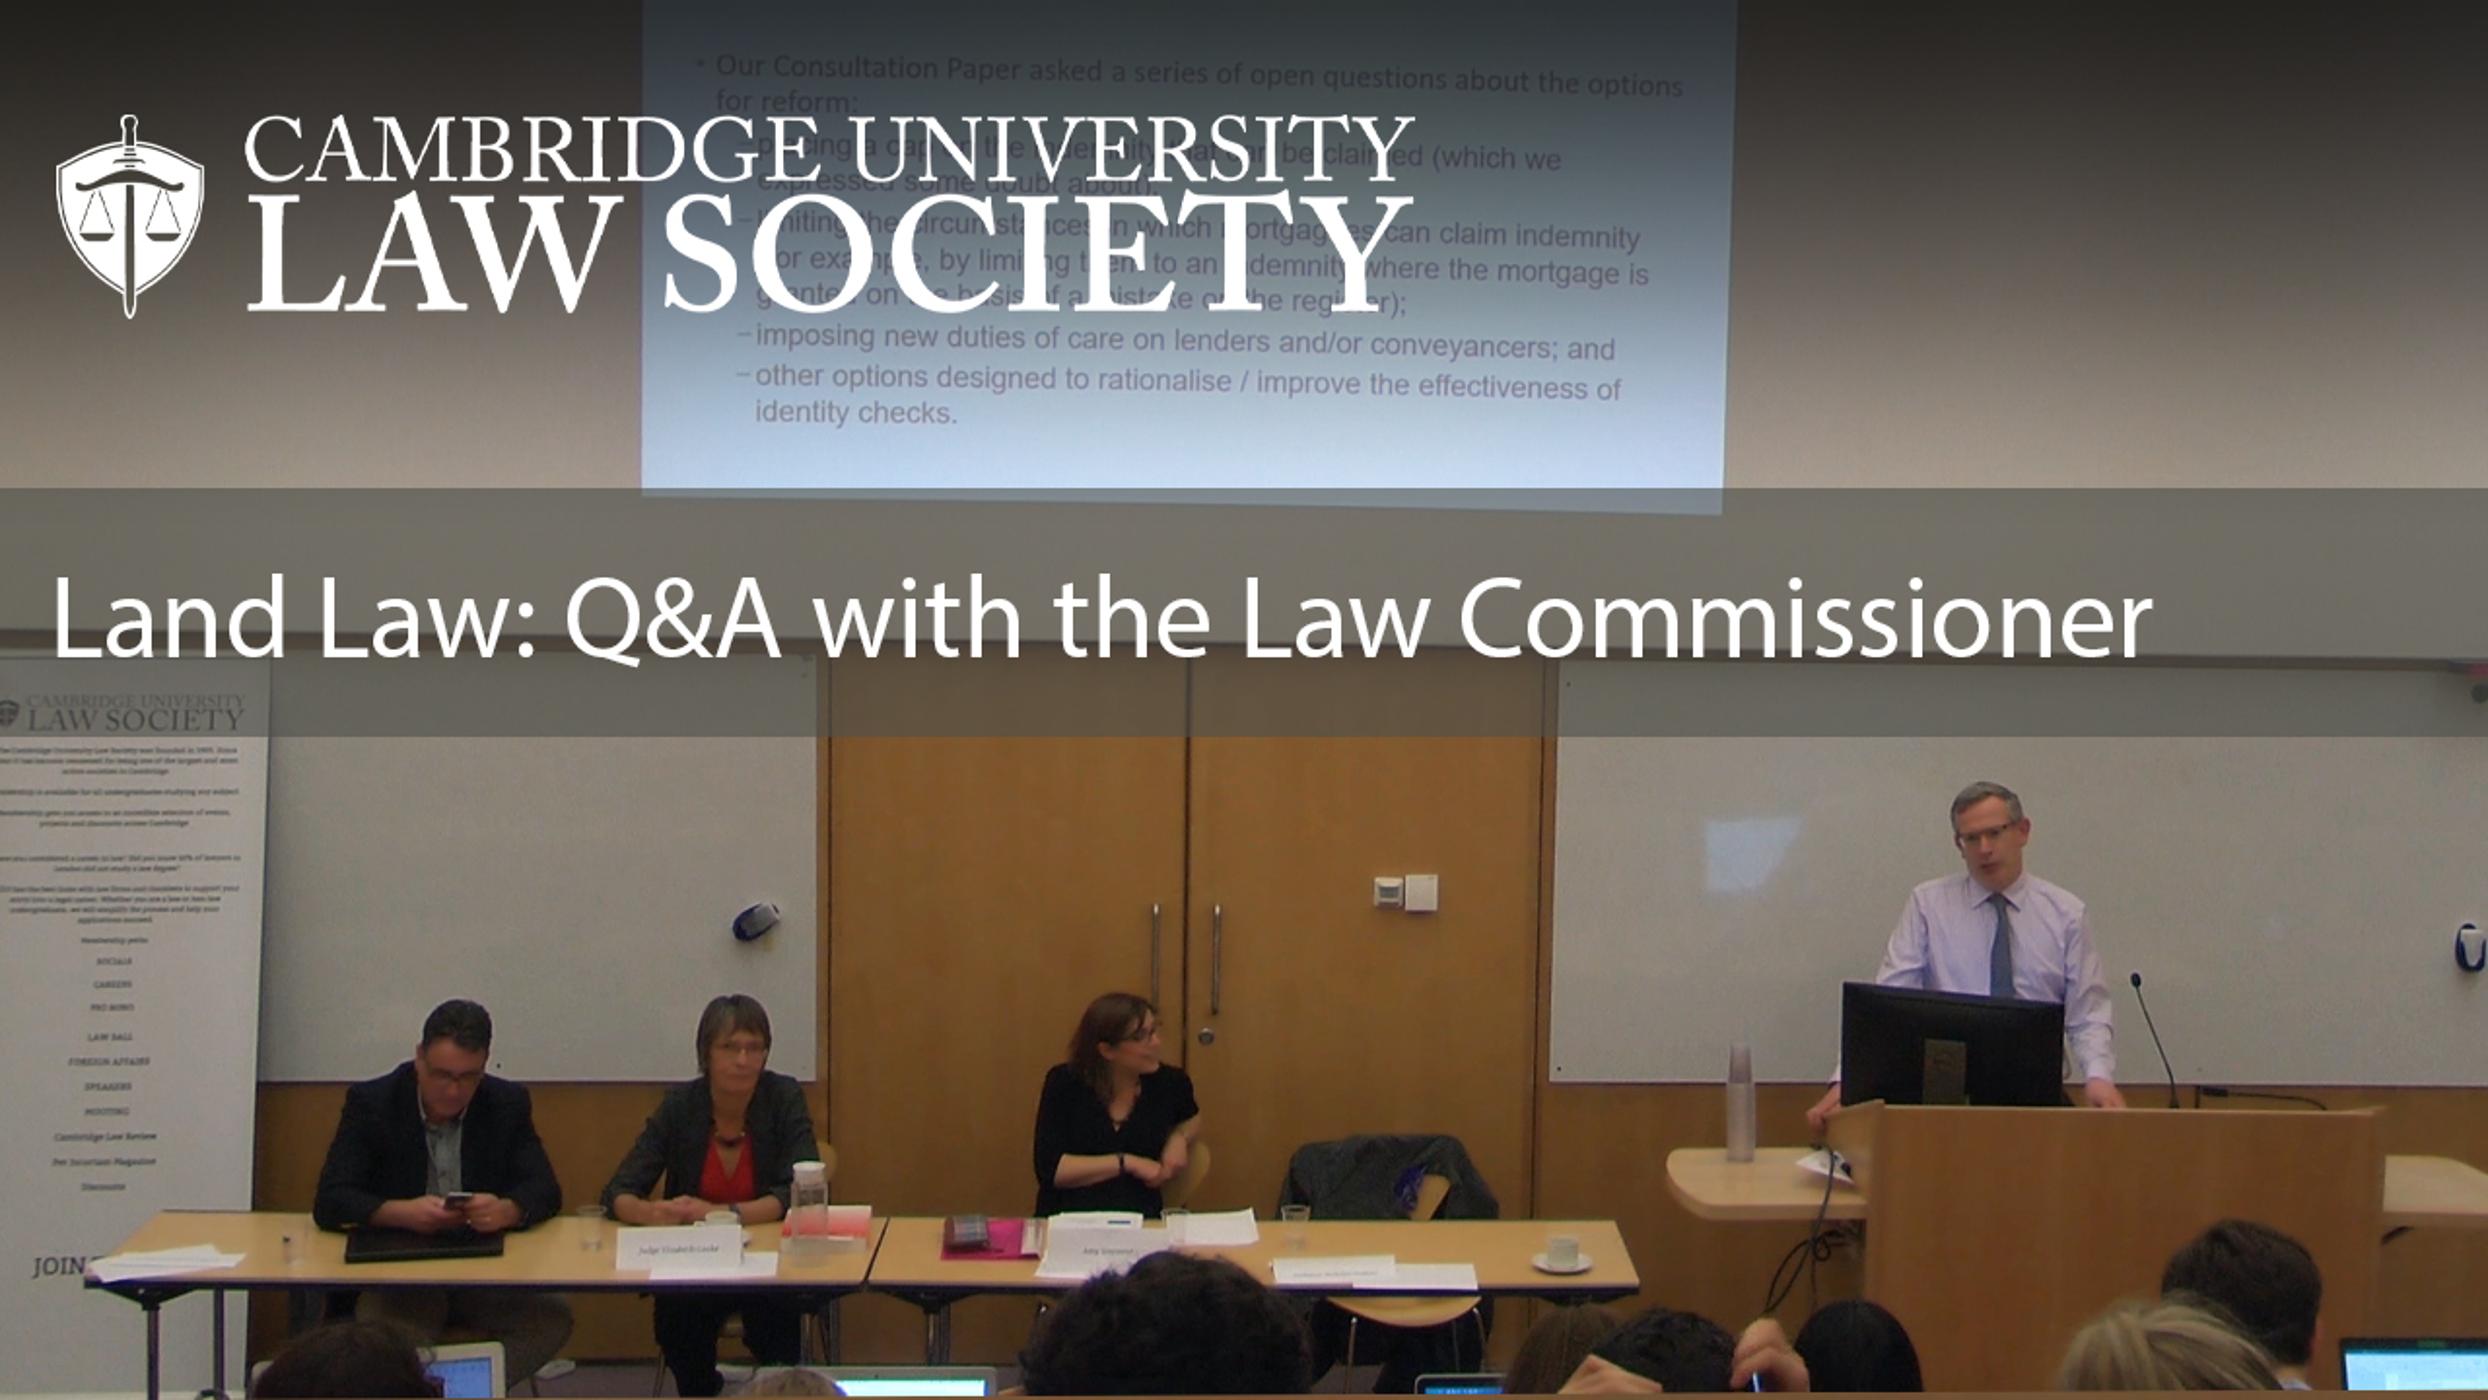 Land Law: Q&A with the Law Commissioner: CULS Panel event (audio)